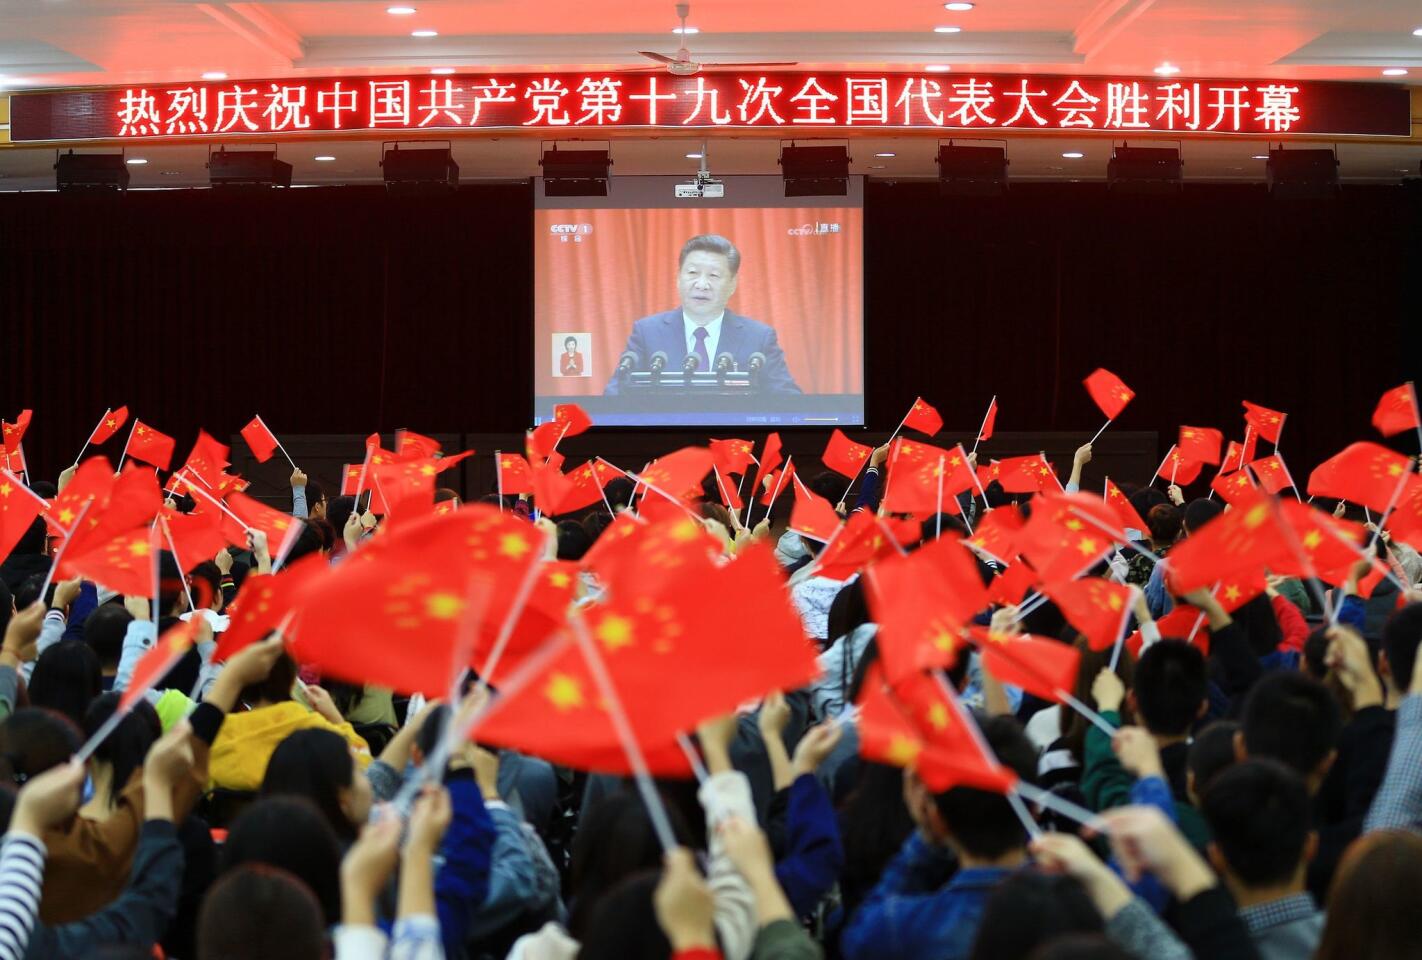 College students wave national flags as they watch the opening of the 19th Communist Party Congress in Huaibei in China's eastern Anhui province.